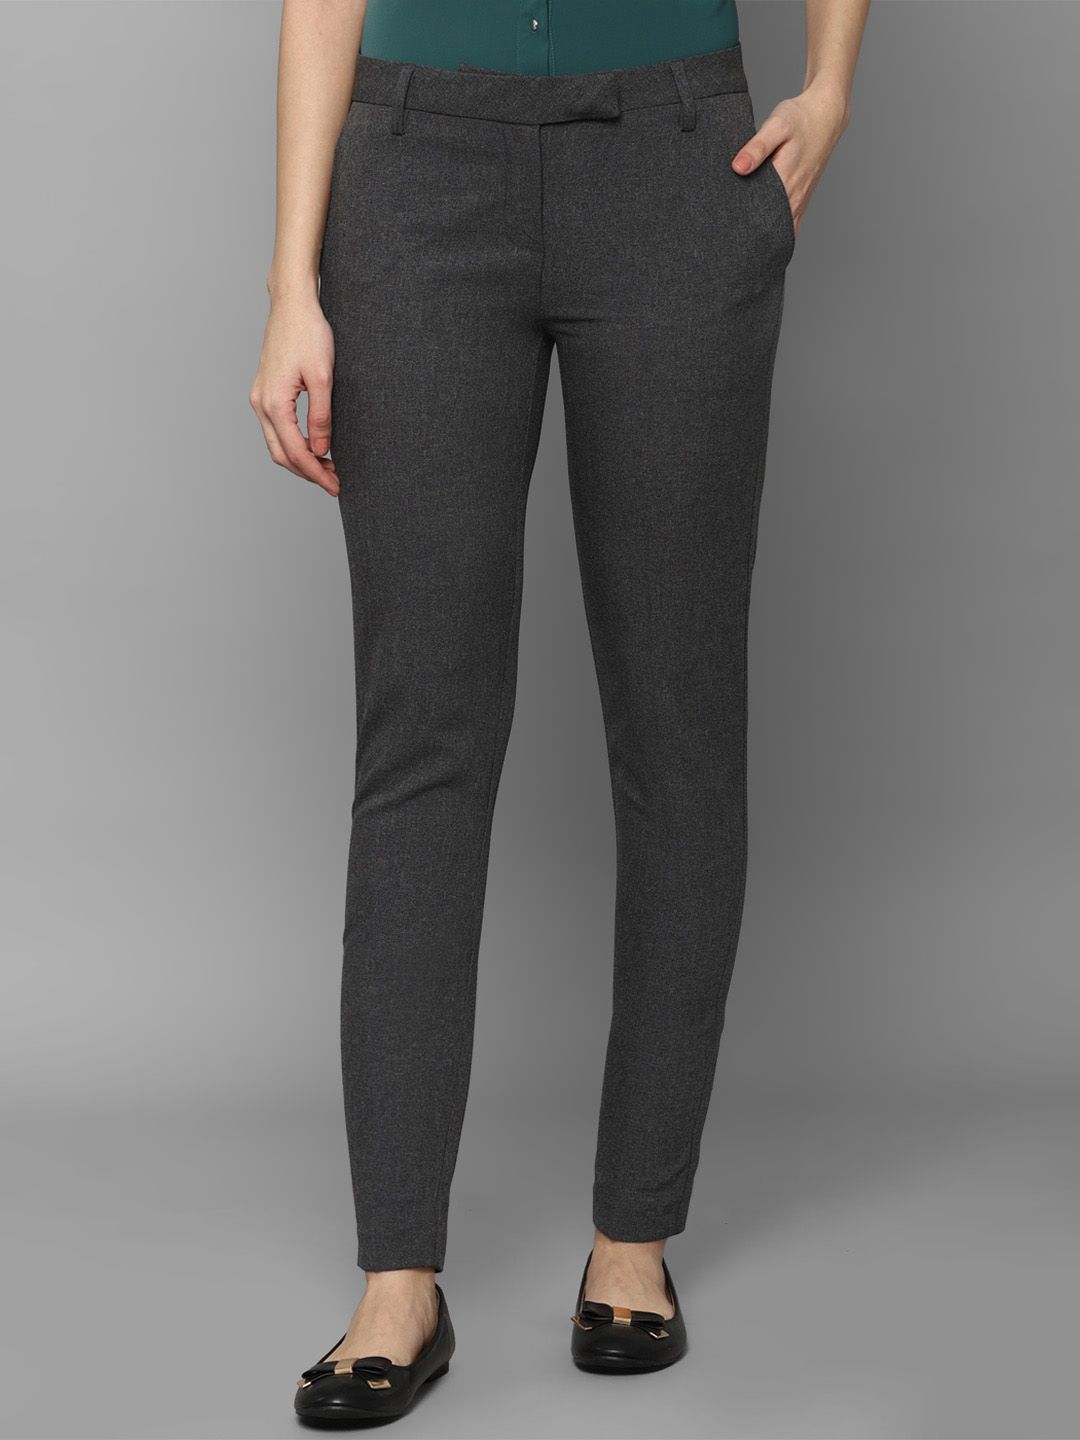 Allen Solly Woman Women Grey Trousers Price in India